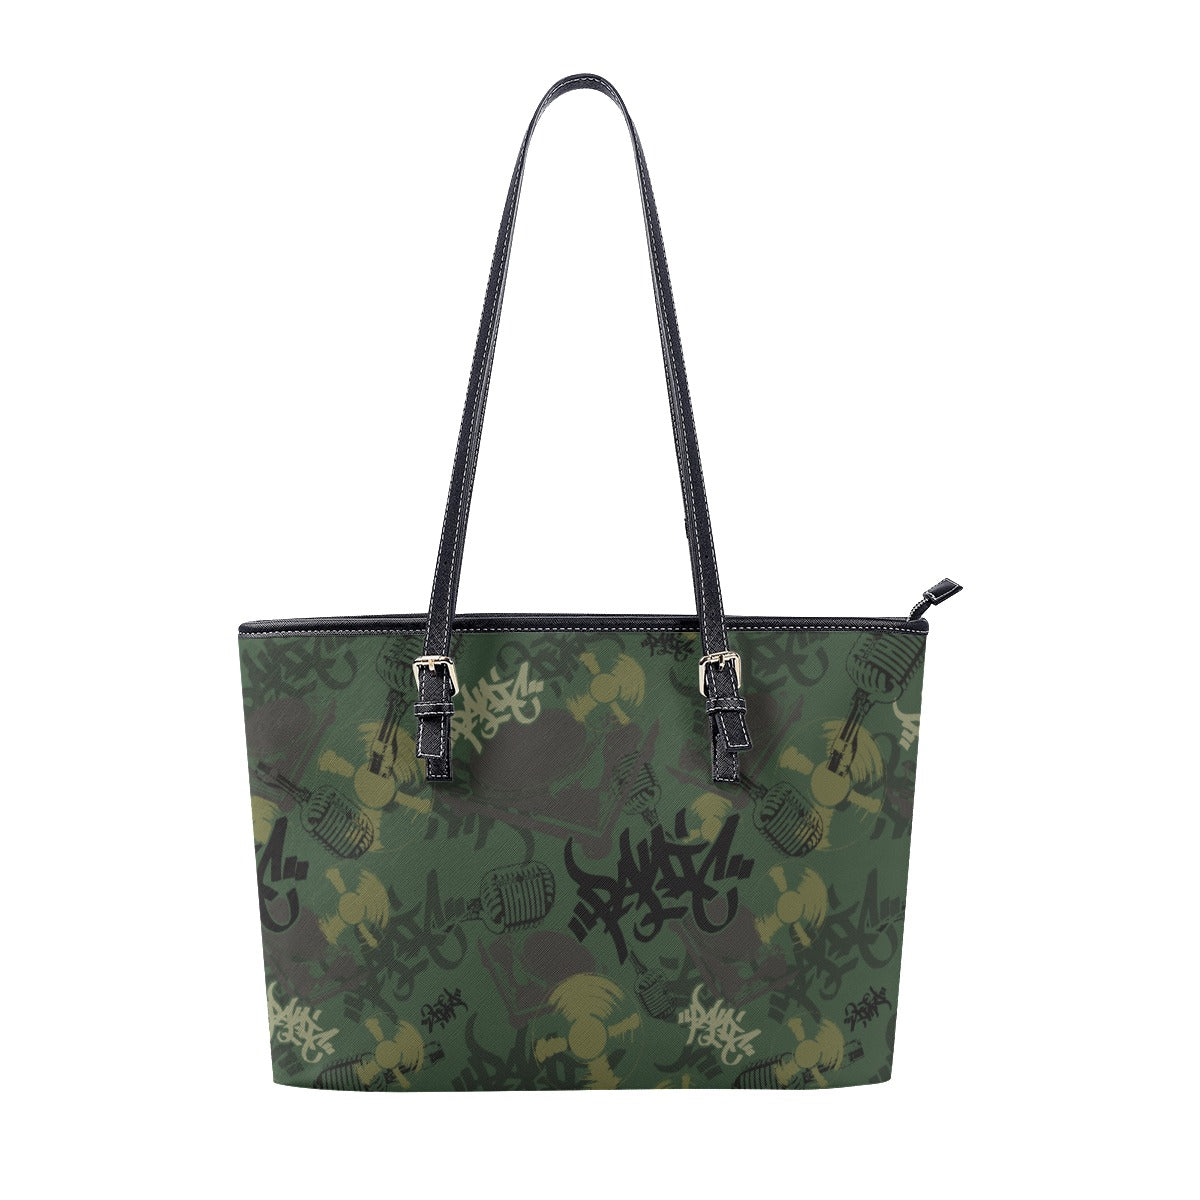 THE ELEMENTS GREEN CAMO FAUX LEATHER TOTE BAG - Panic 39